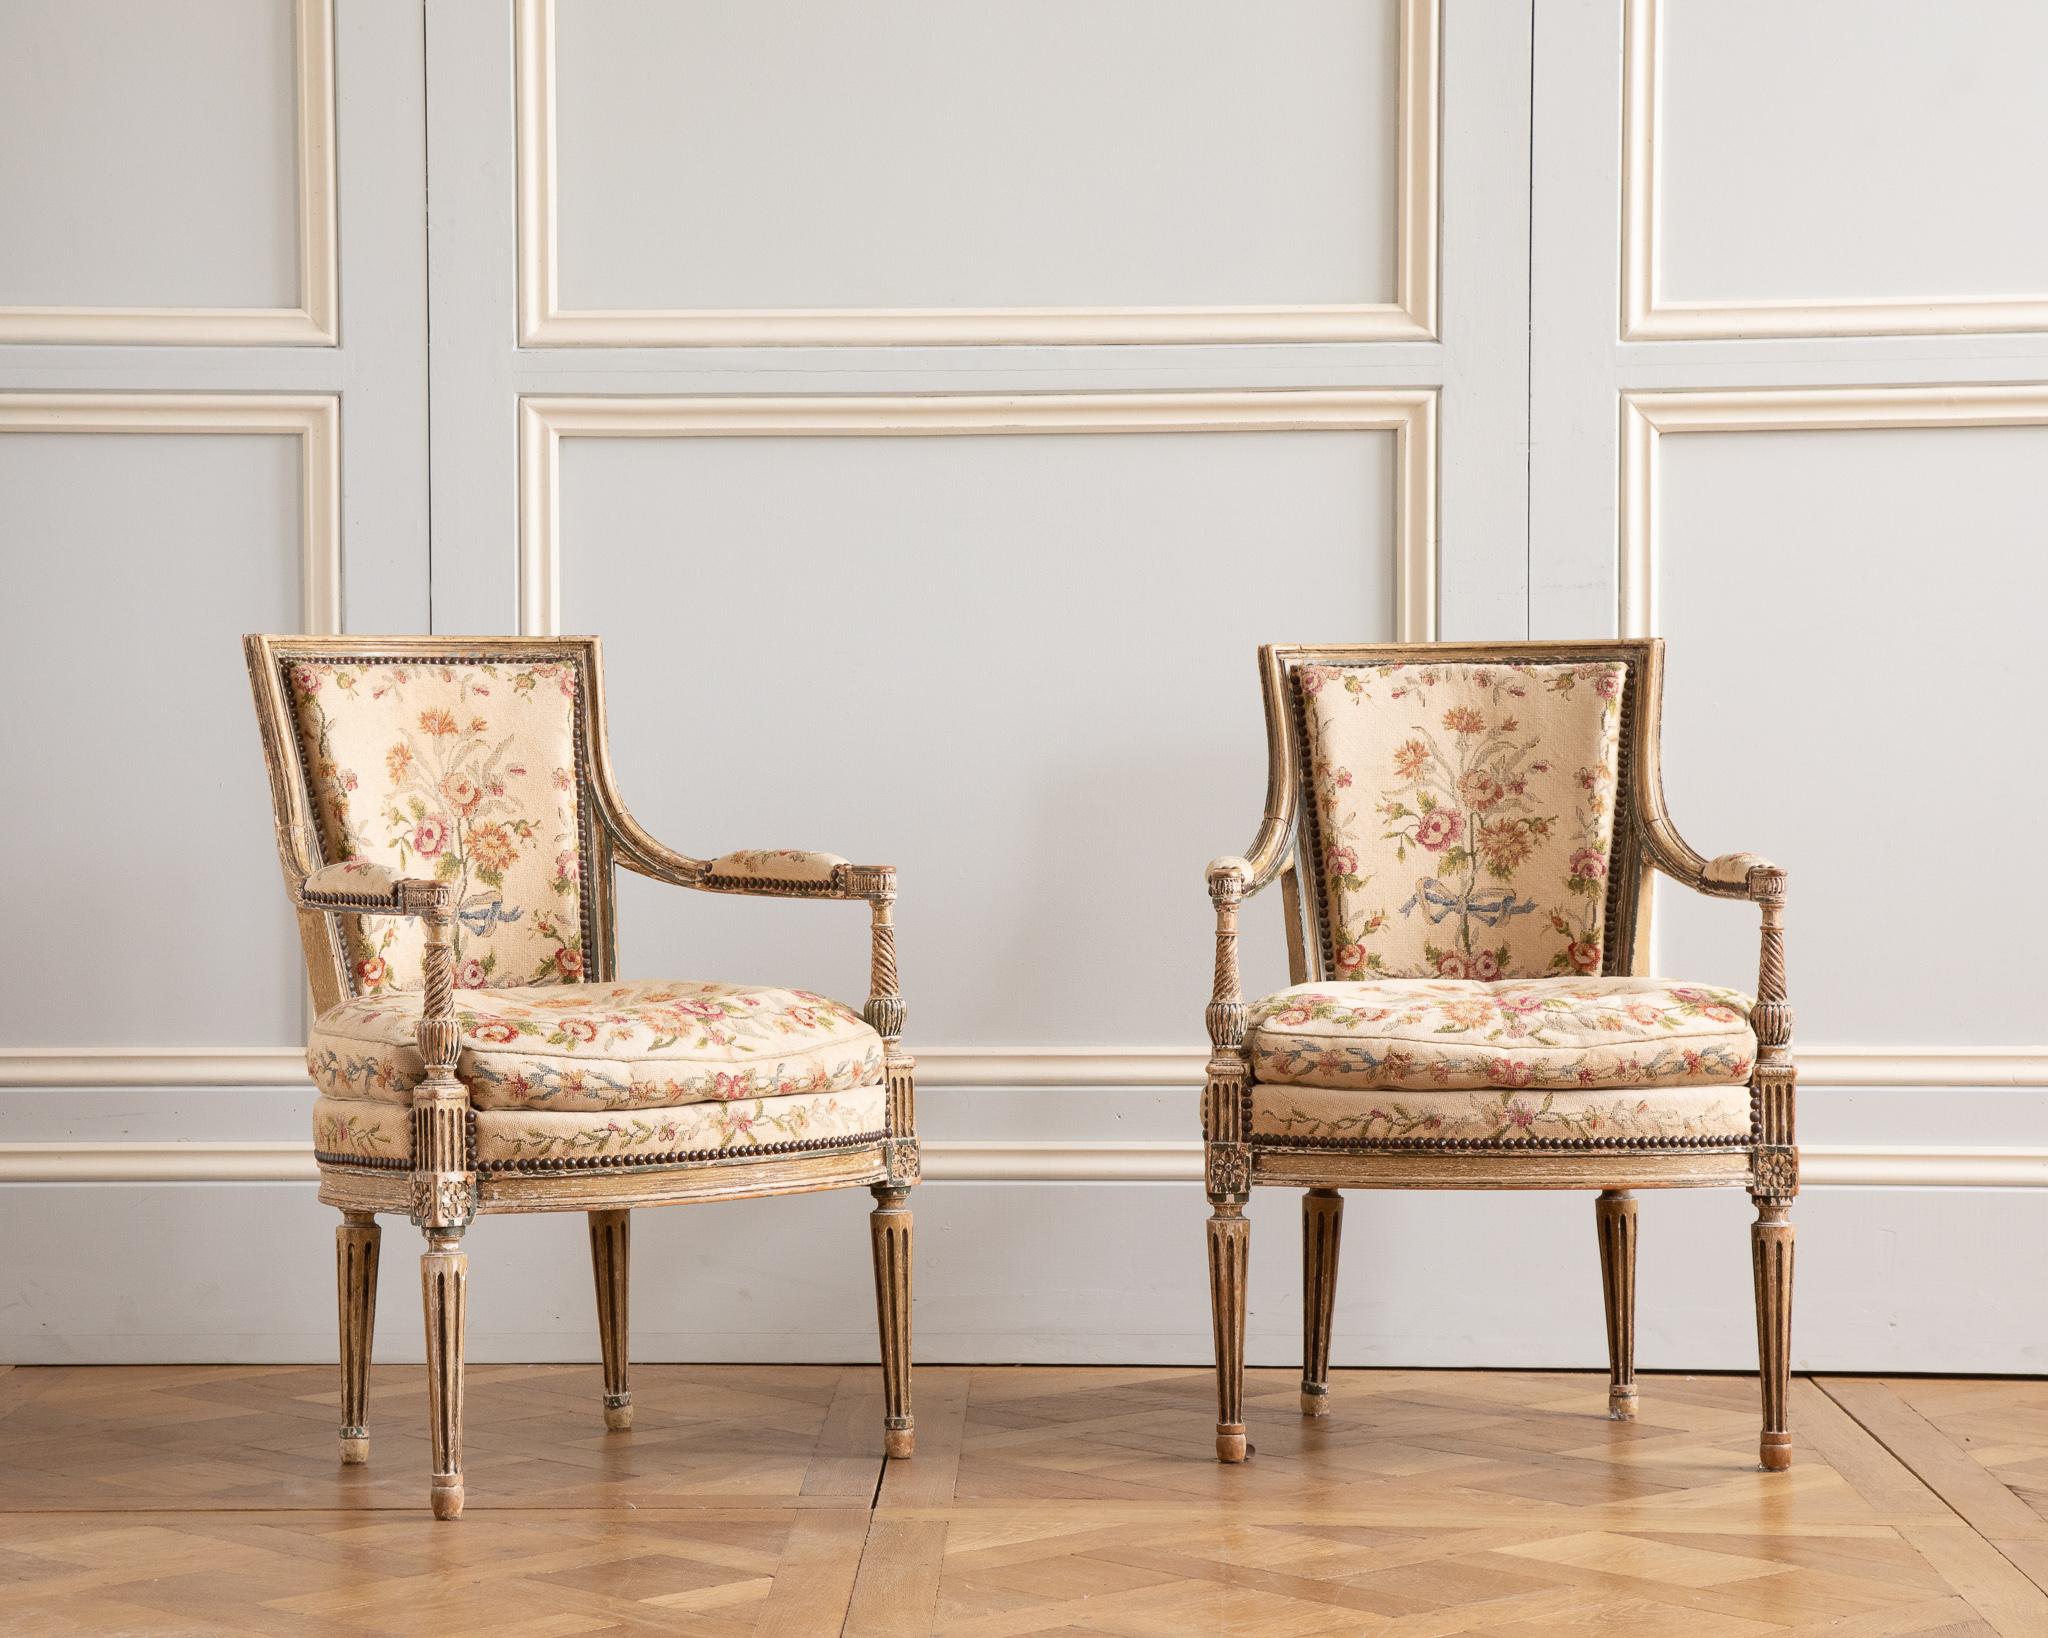 A late 19th century pair of Armchairs Painted in two tones of French green and cream with an original patina.
with tapered and fluted legs
They are both upholstered with a Floral Needlepoint fabric.

